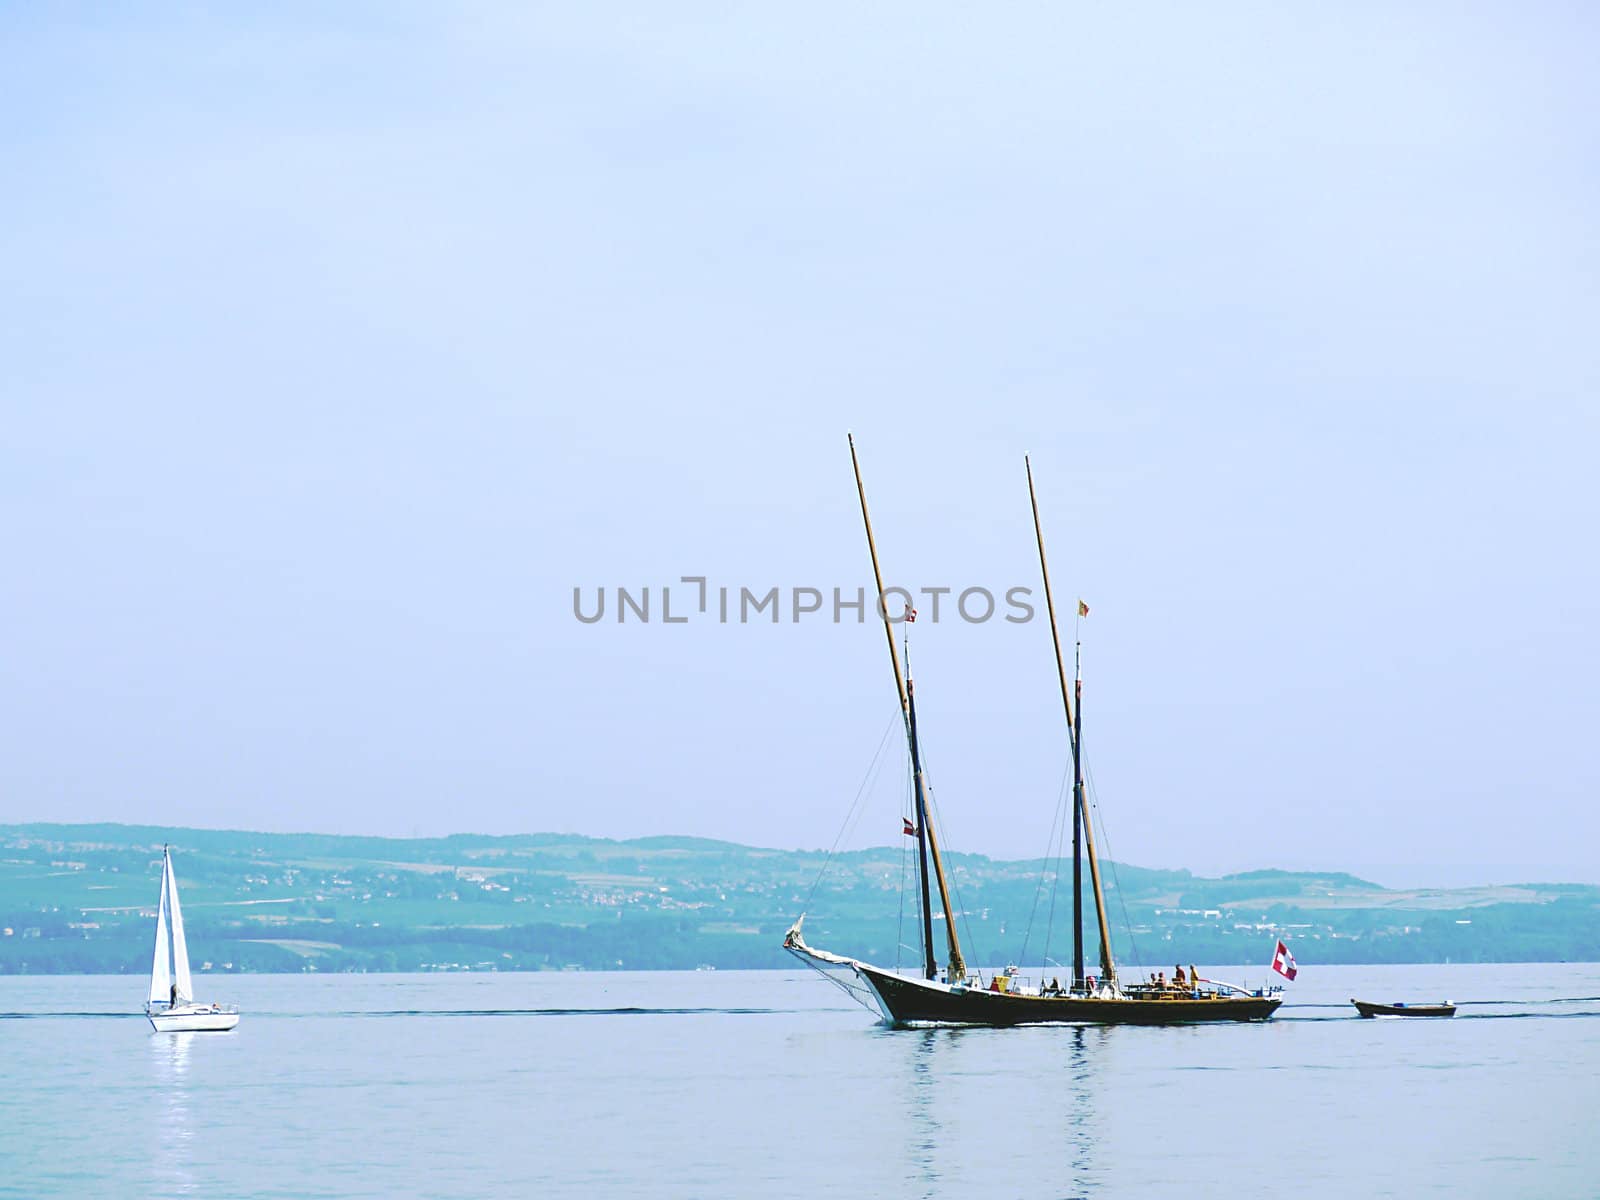 Big ancient boat and small white sailing boat on lake of Geneva, Switzerland, with little hill behind